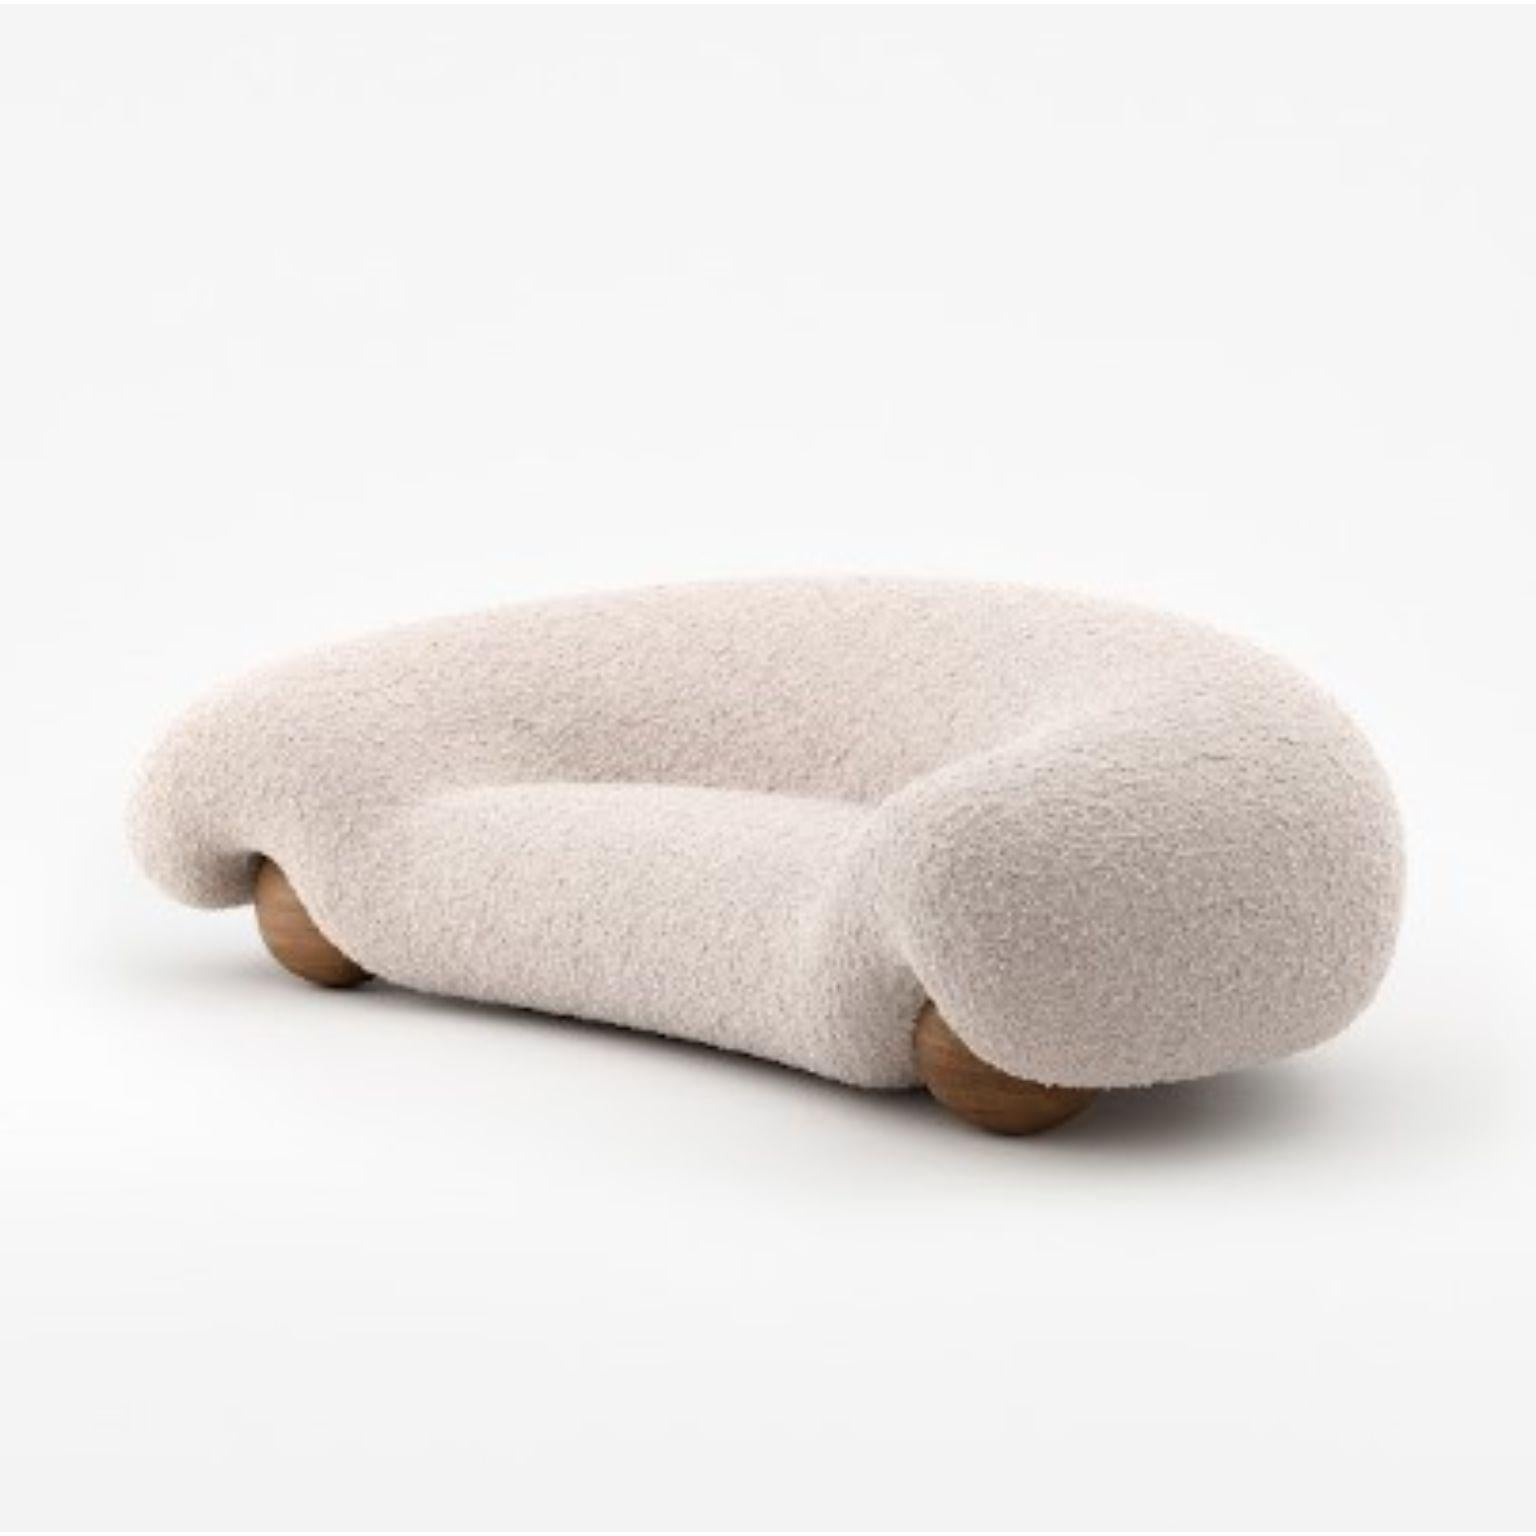 Lamb Sofa by NUMO
Dimensions: D 284 x W 164 x H 84 cm
Materials: Faux Lamb Fur, Wood
Customizable Size. Please contact us.

 Vladimir Naumov is a professional architect, designer and artist.

While designing the furniture he tries to reach the